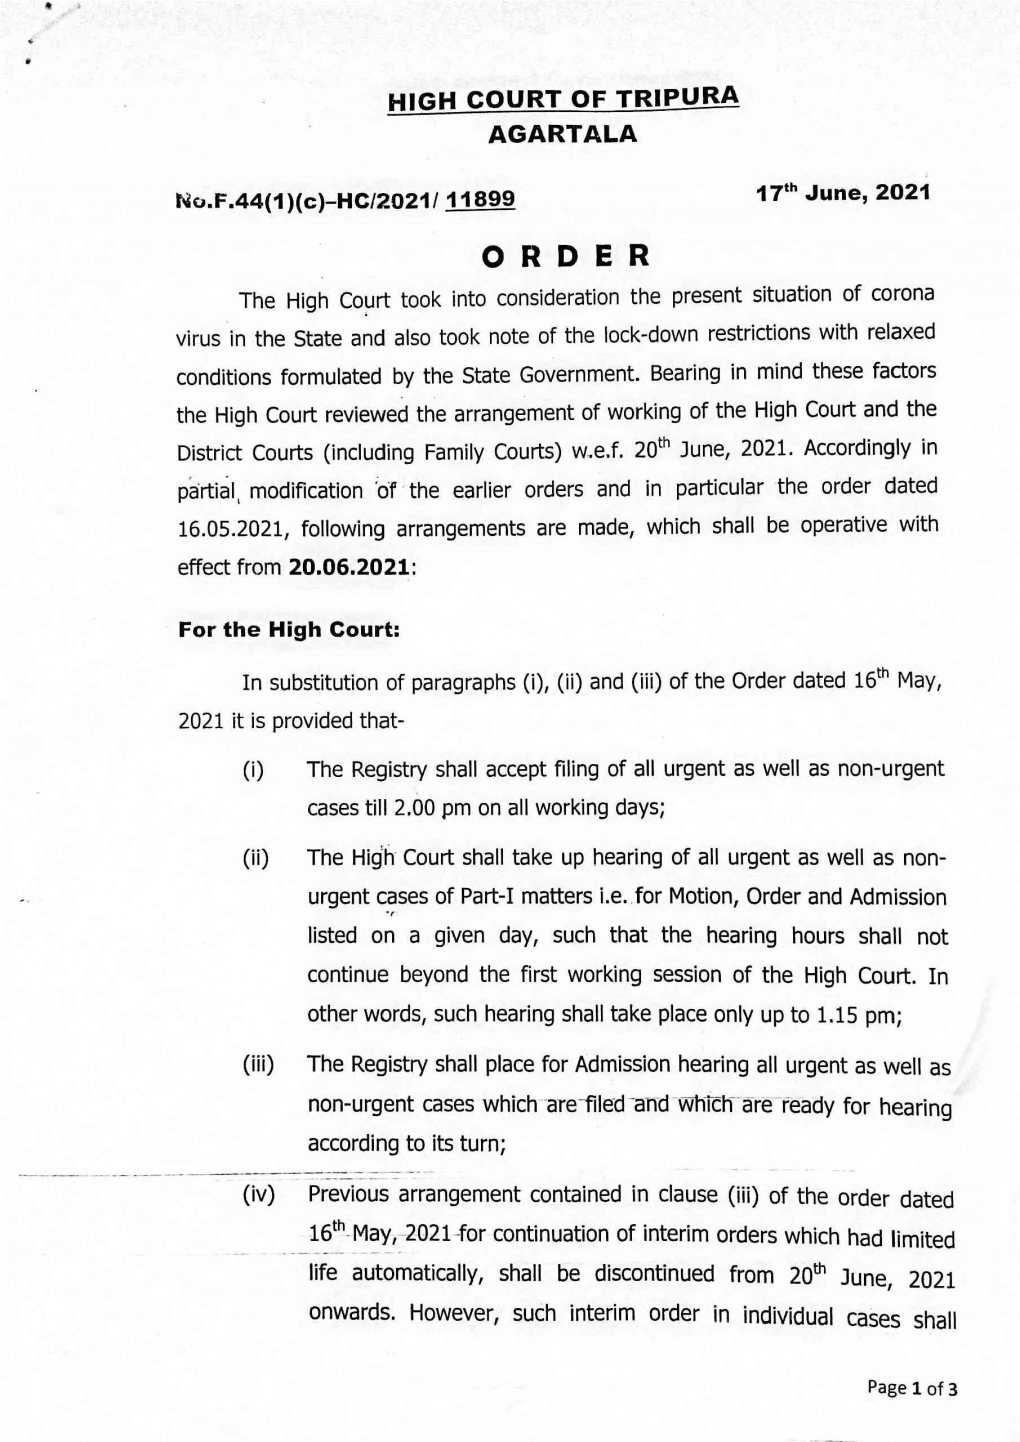 Order Dated 17-06-2021 Regarding Arrangement of Working of the High Court and the District